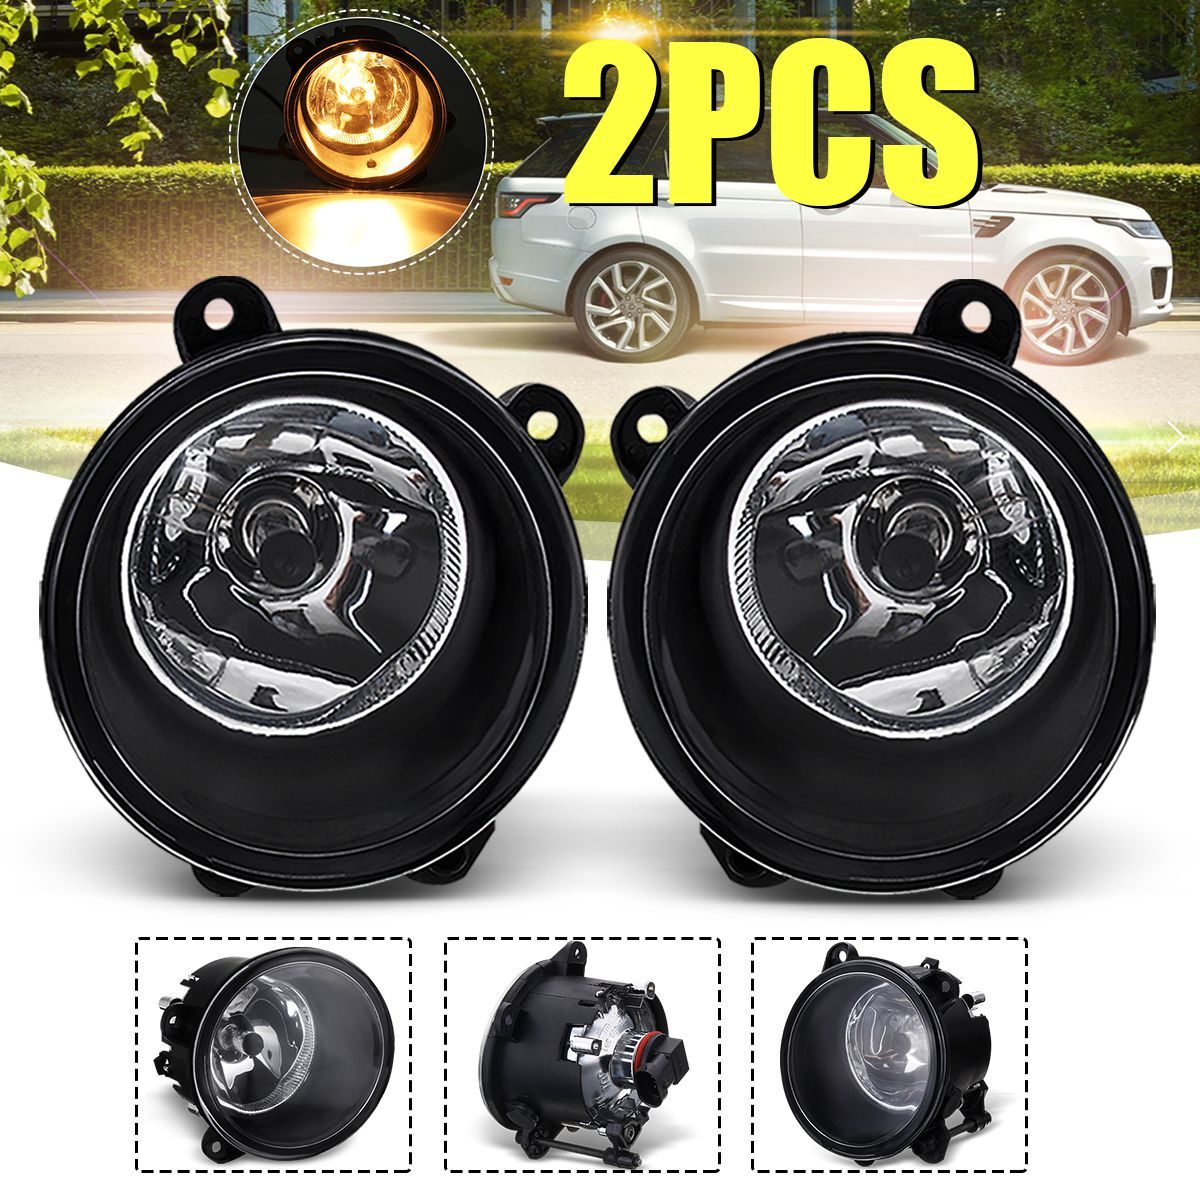 Car-Front-Fog-Lights-with-H11-Halogen-Bulbs-Pair-For-Land-Rover-Discovery-3-Range-Rover-Sport-1583957